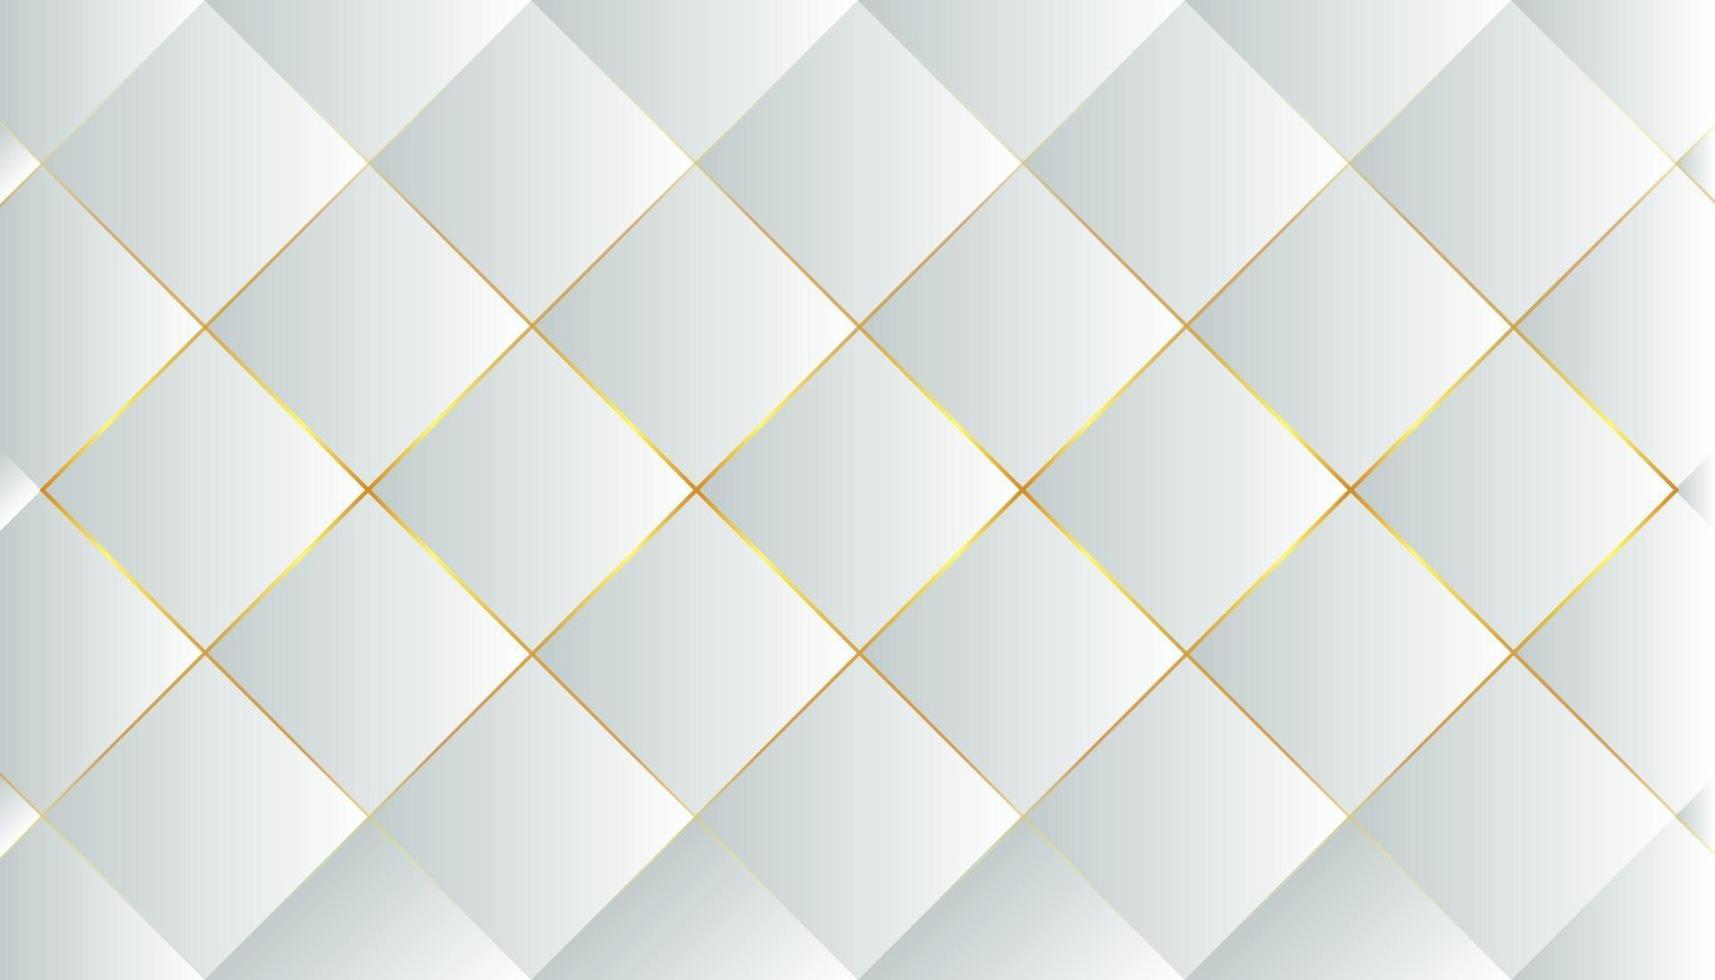 Abstract Geometric Background With Golden Lines vector